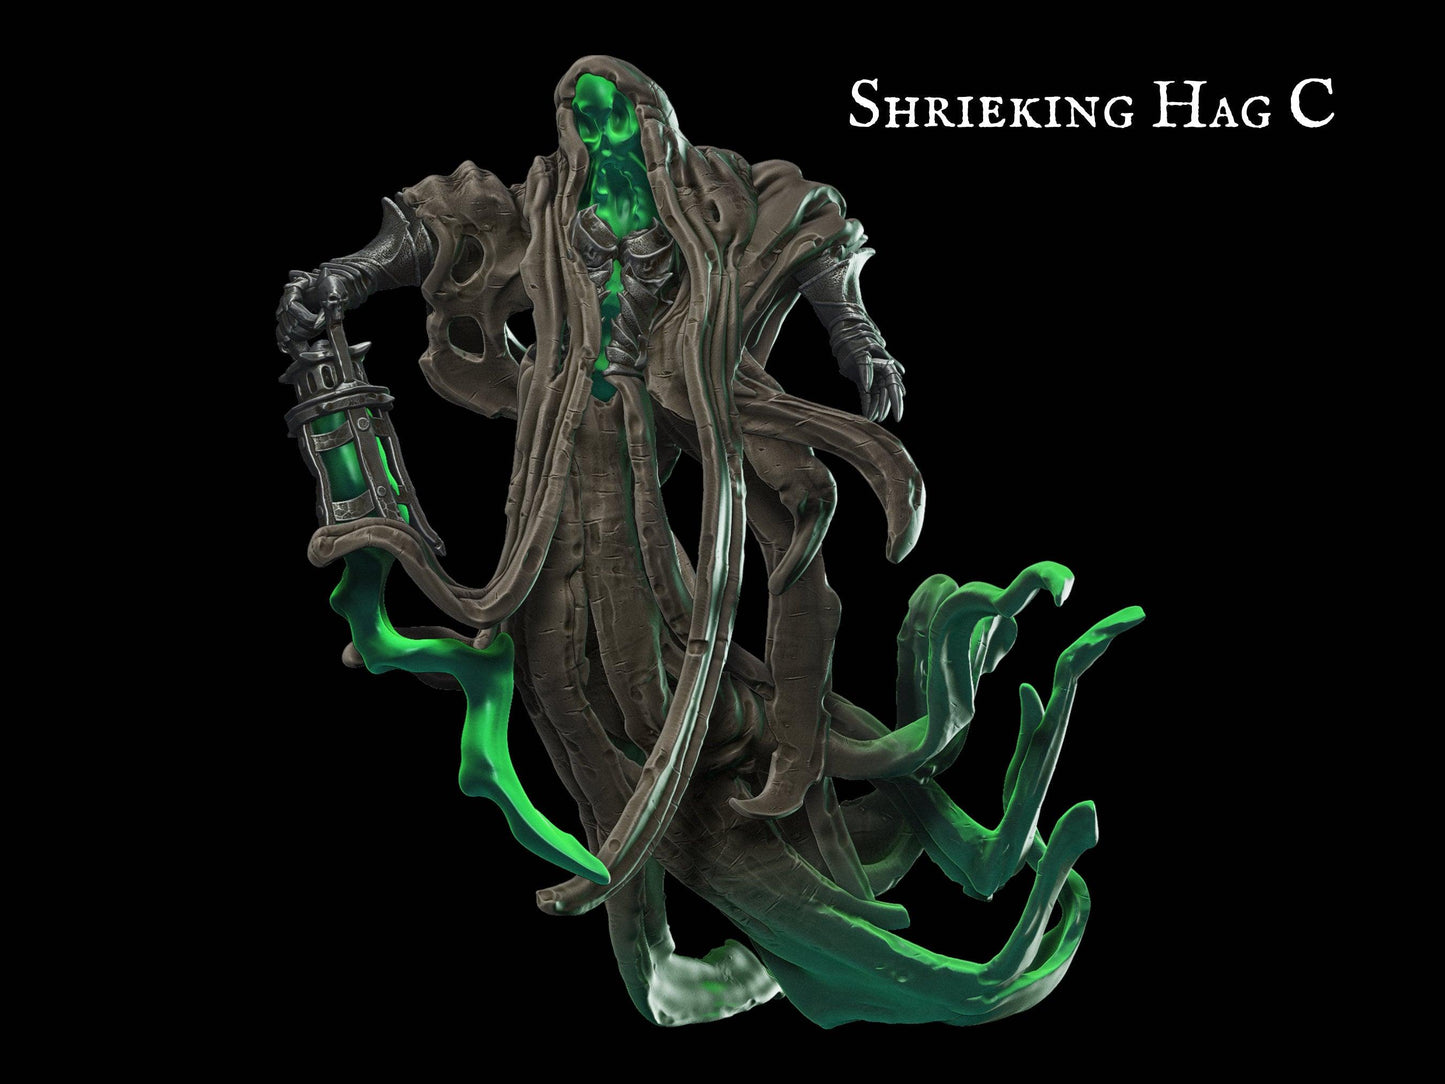 Shrieking Hag Miniature - 28mm scale Tabletop gaming DnD Miniature Dungeons and Dragons, dnd 5e wargaming dungeon master gift - Plague Miniatures shop for DnD Miniatures